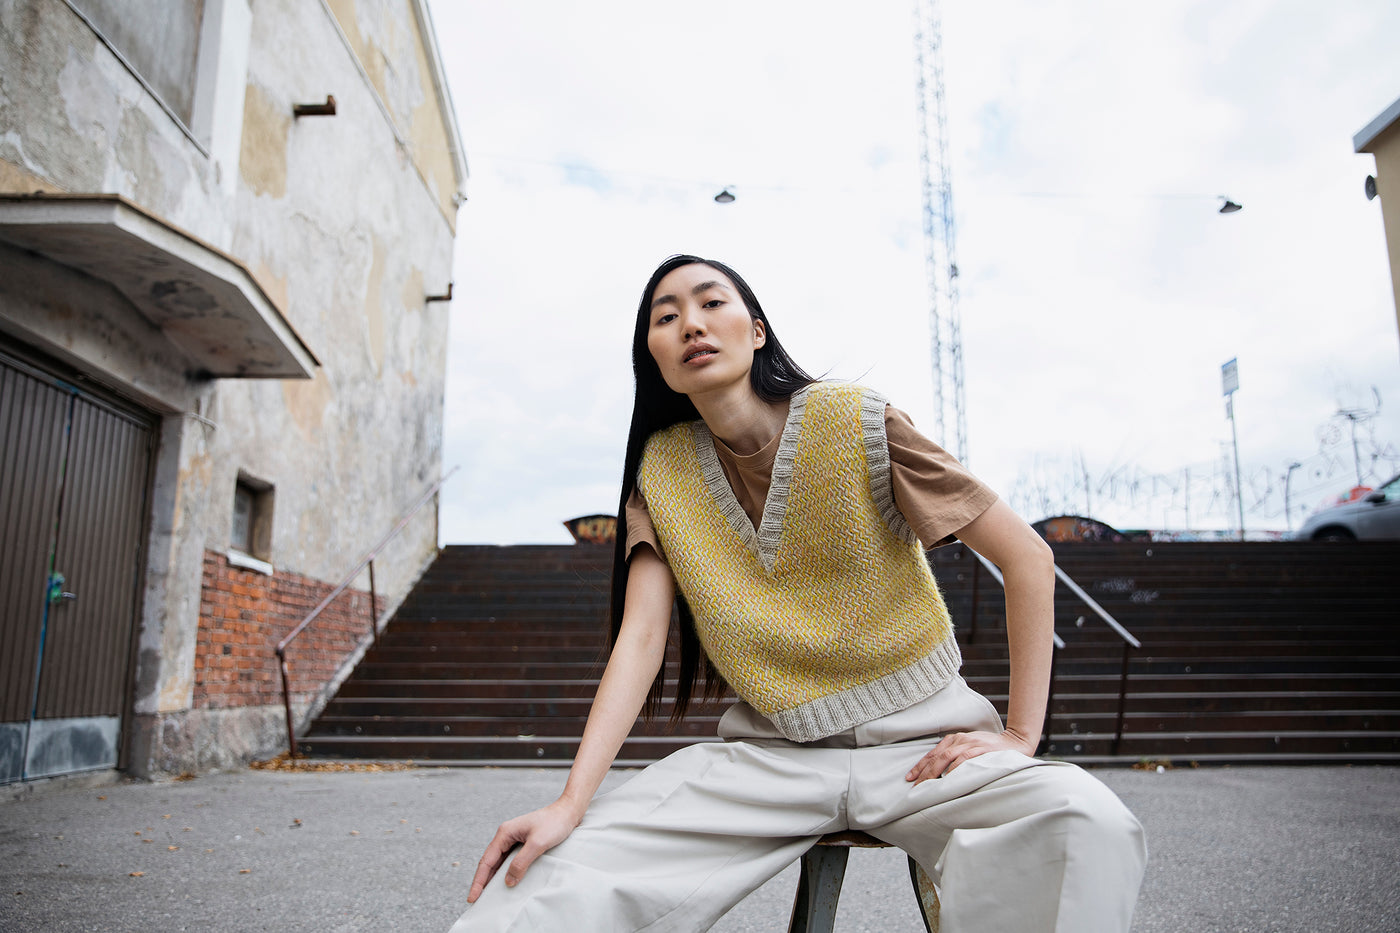 Neons & Neutrals: A Knitwear Collection Curated by Aimée Gille (Aimée Gille)